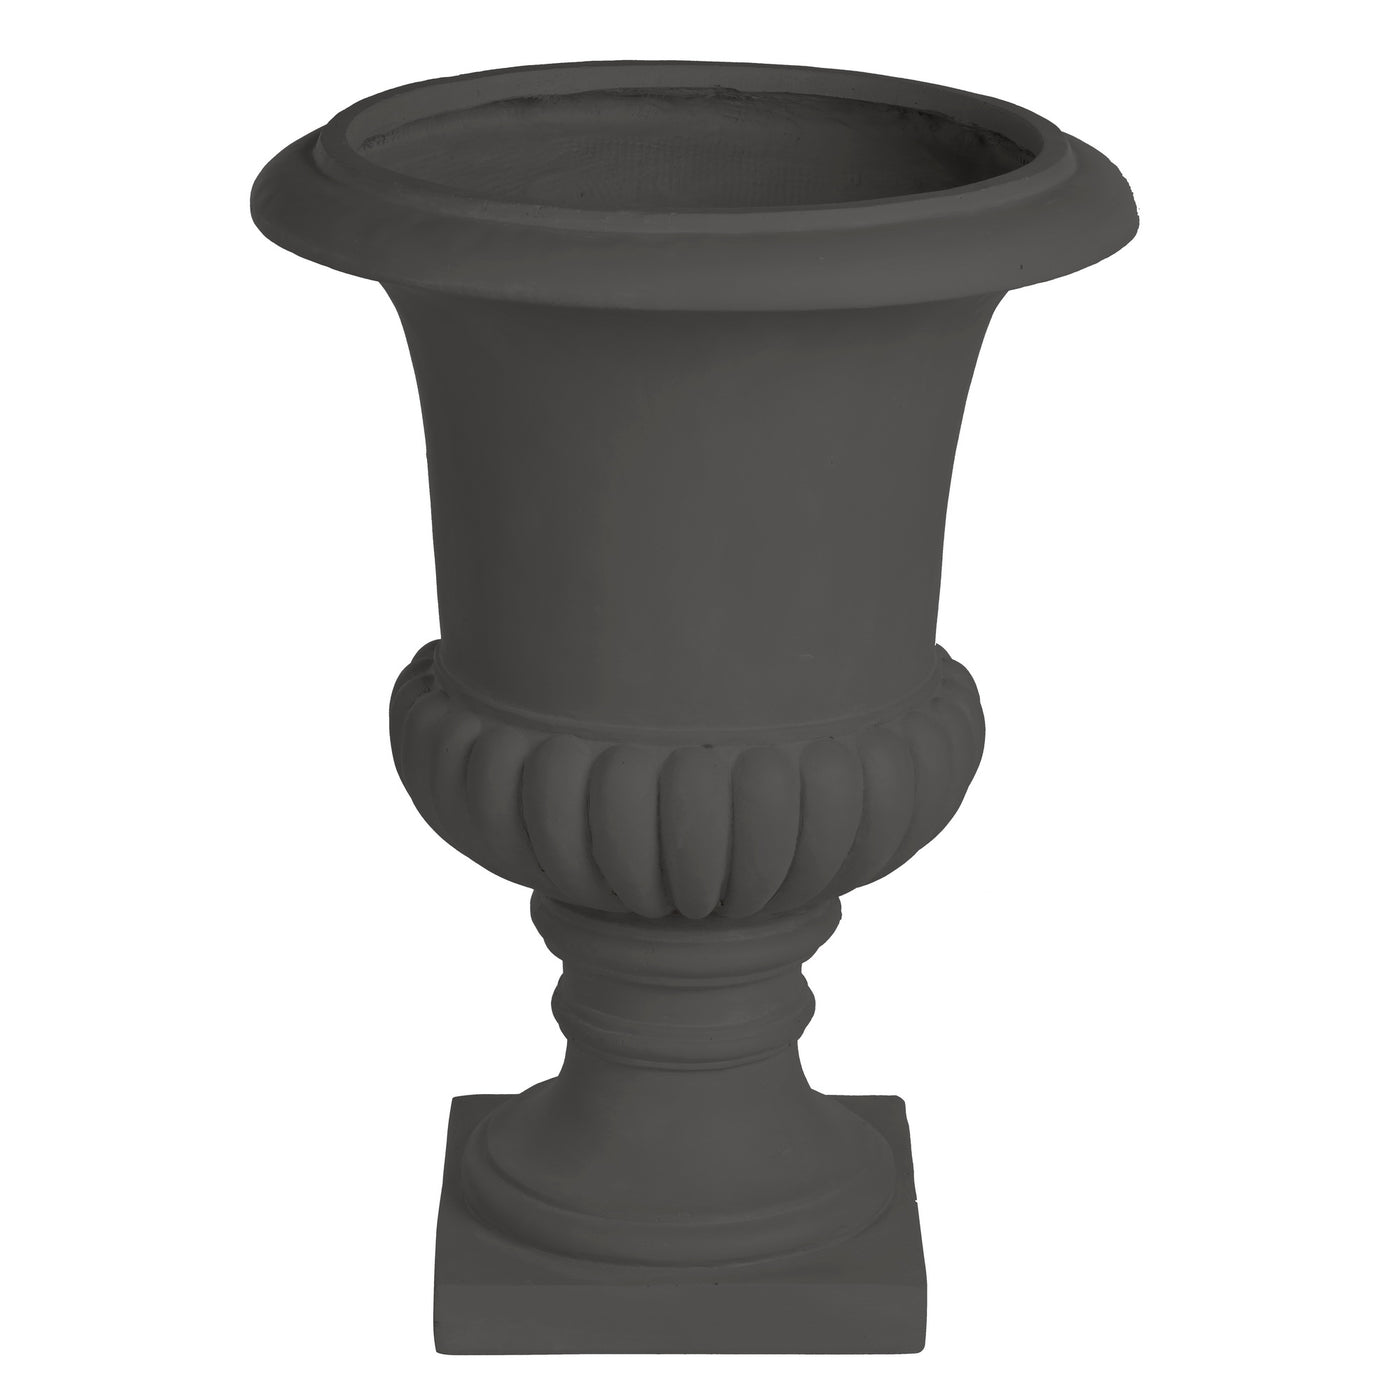 High-quality classic stonecast urn planter in charcoal